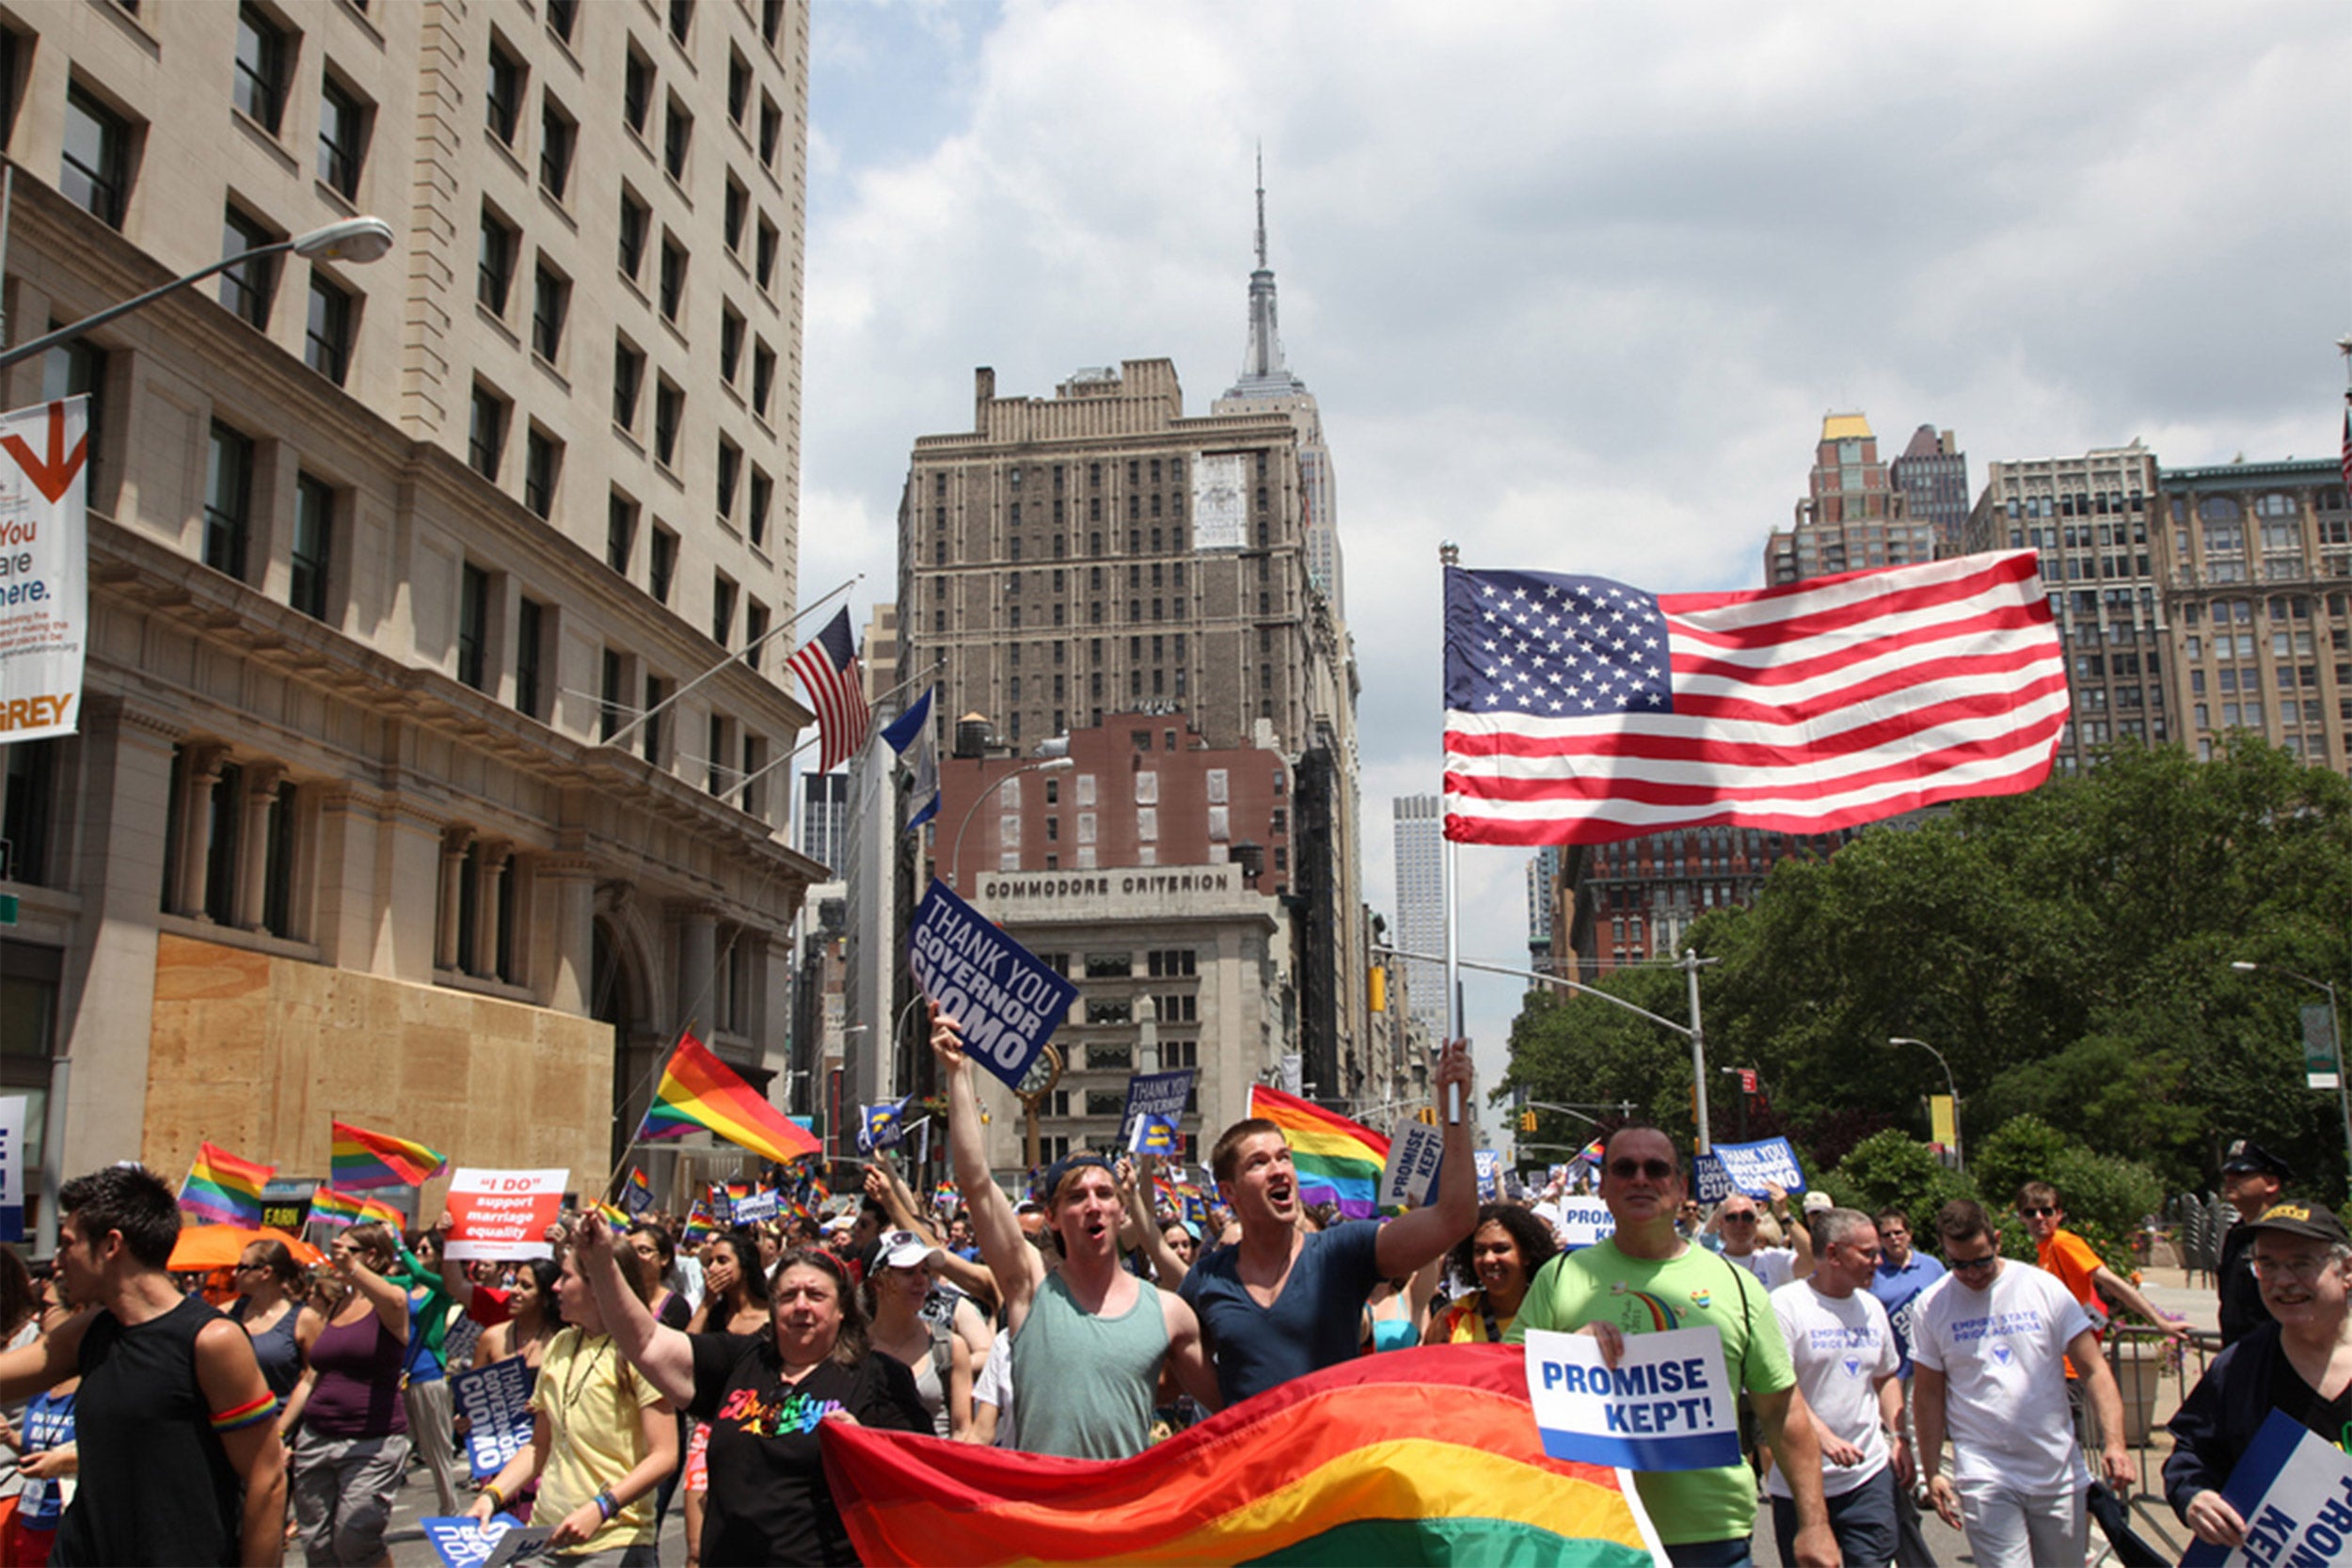 The 2011 New York City Pride March honored the legalization of same-sex marriage in New York that year.